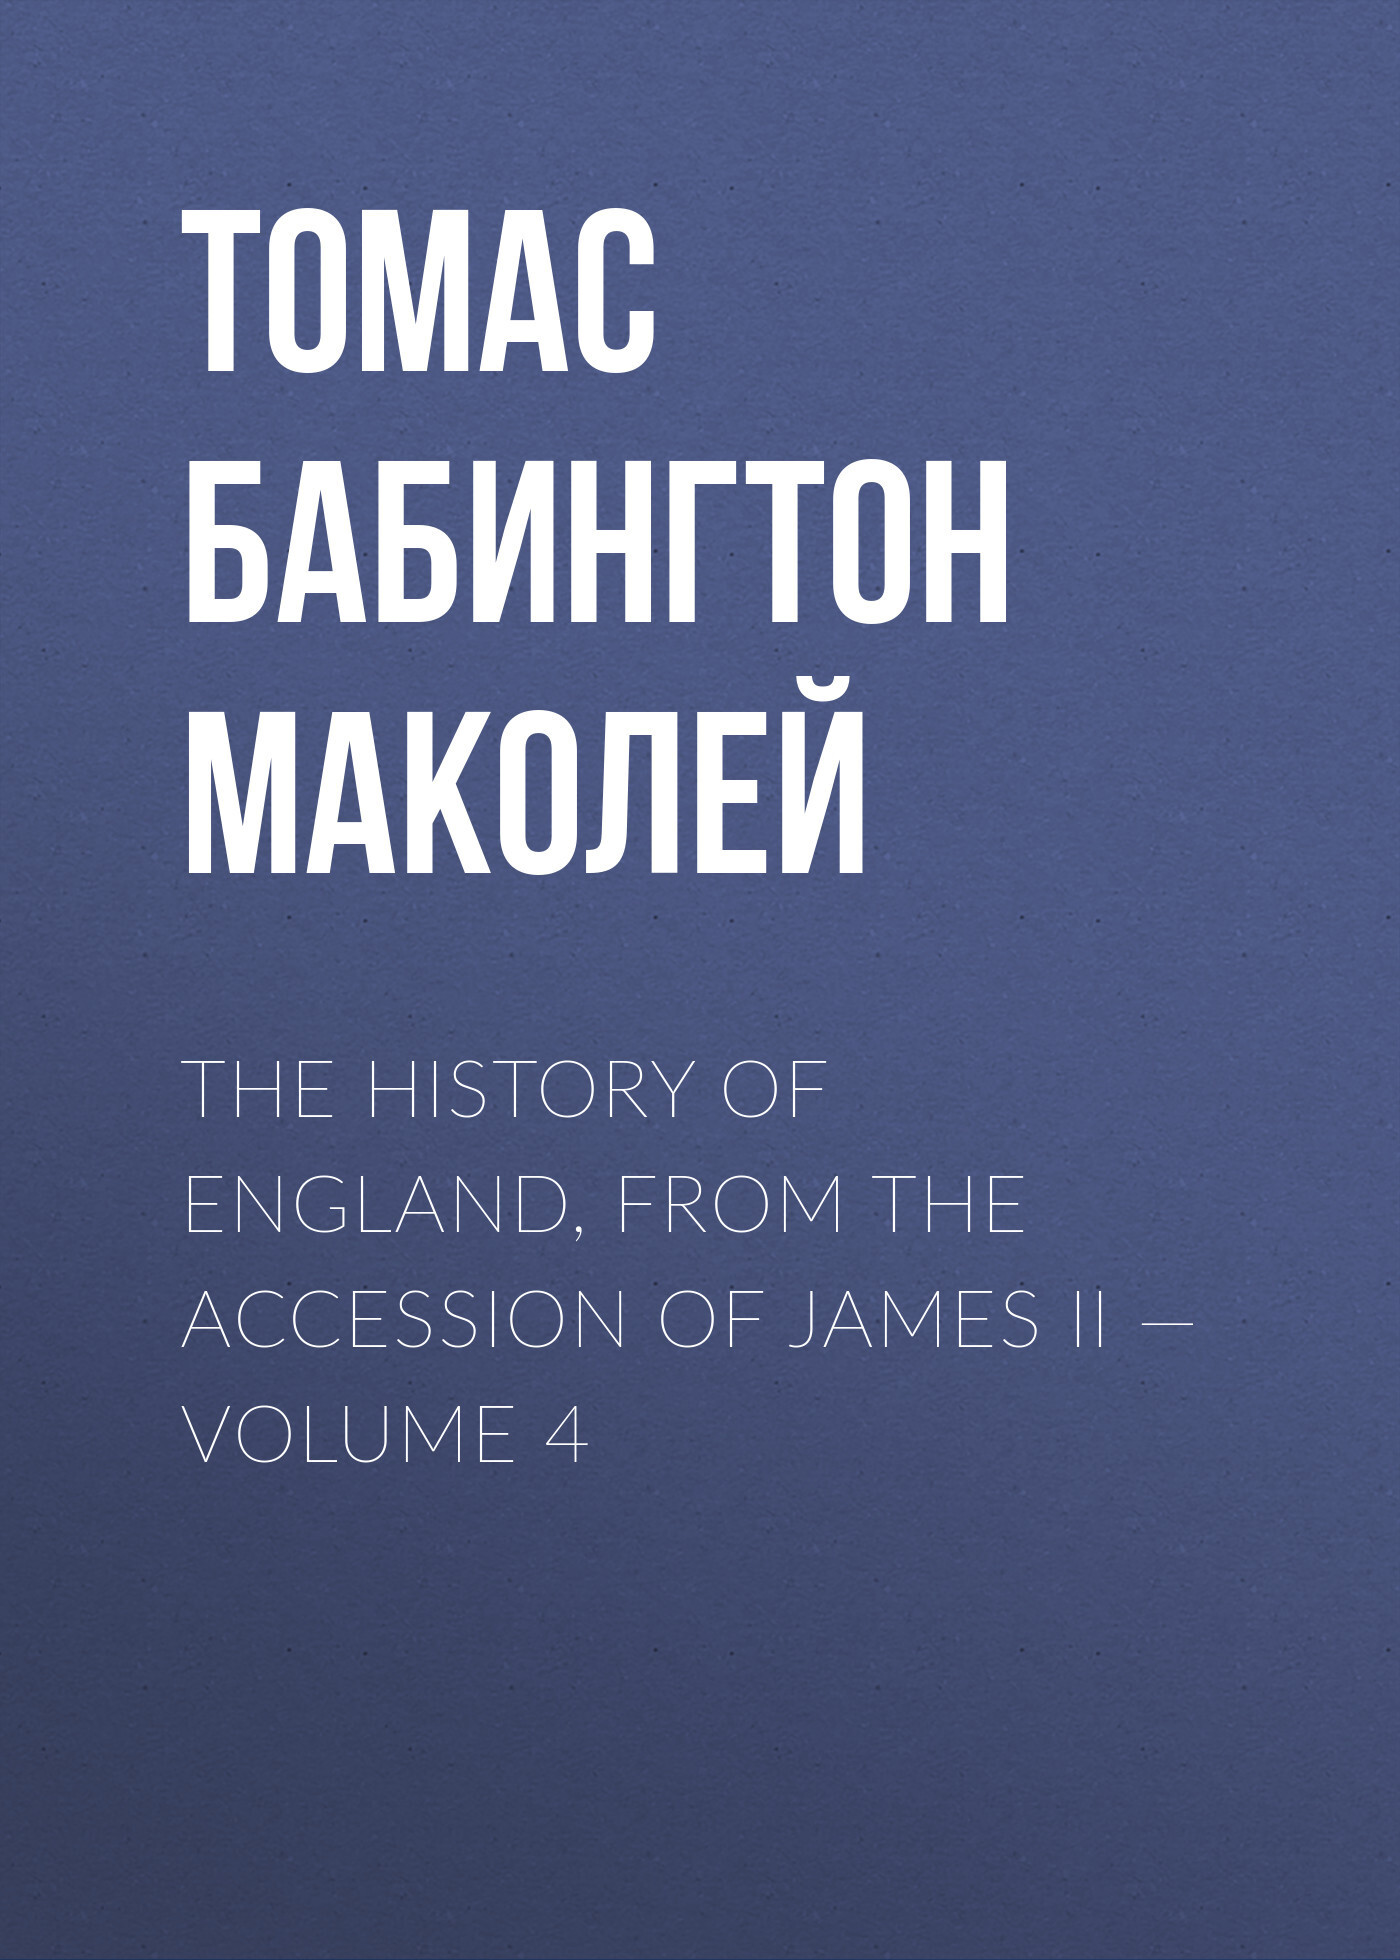 The History of England, from the Accession of James II— Volume 4